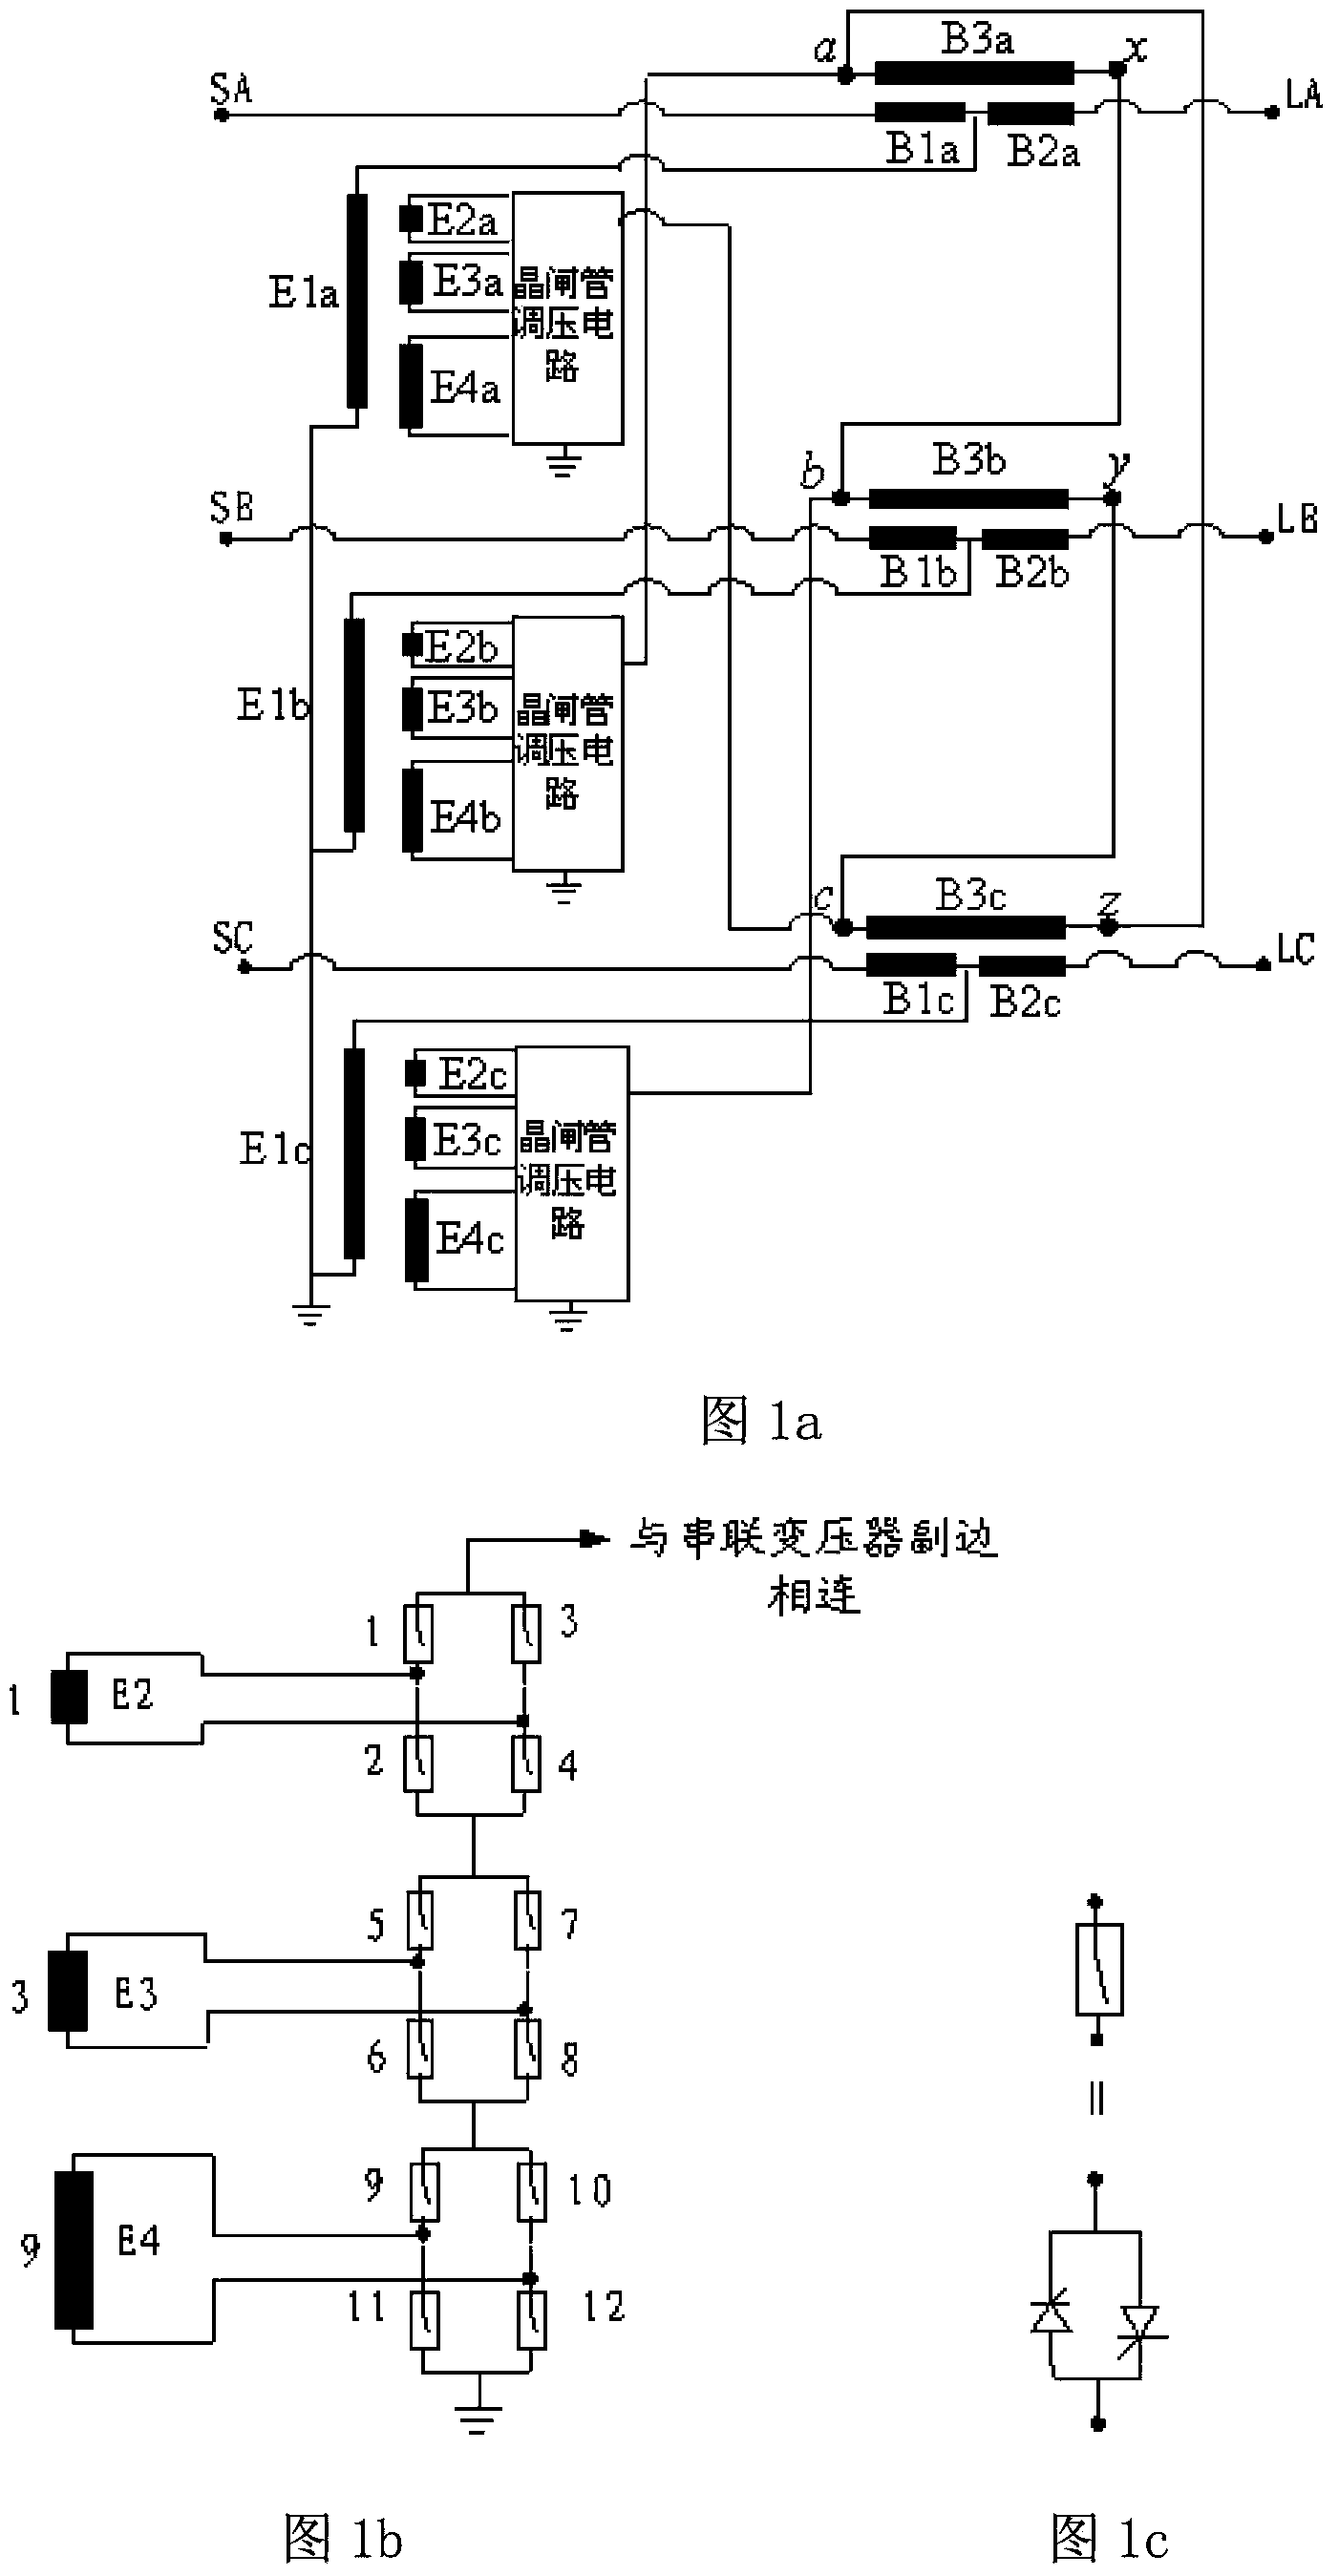 Method for limiting line short-circuit currents by using twin-core controllable phase shifter